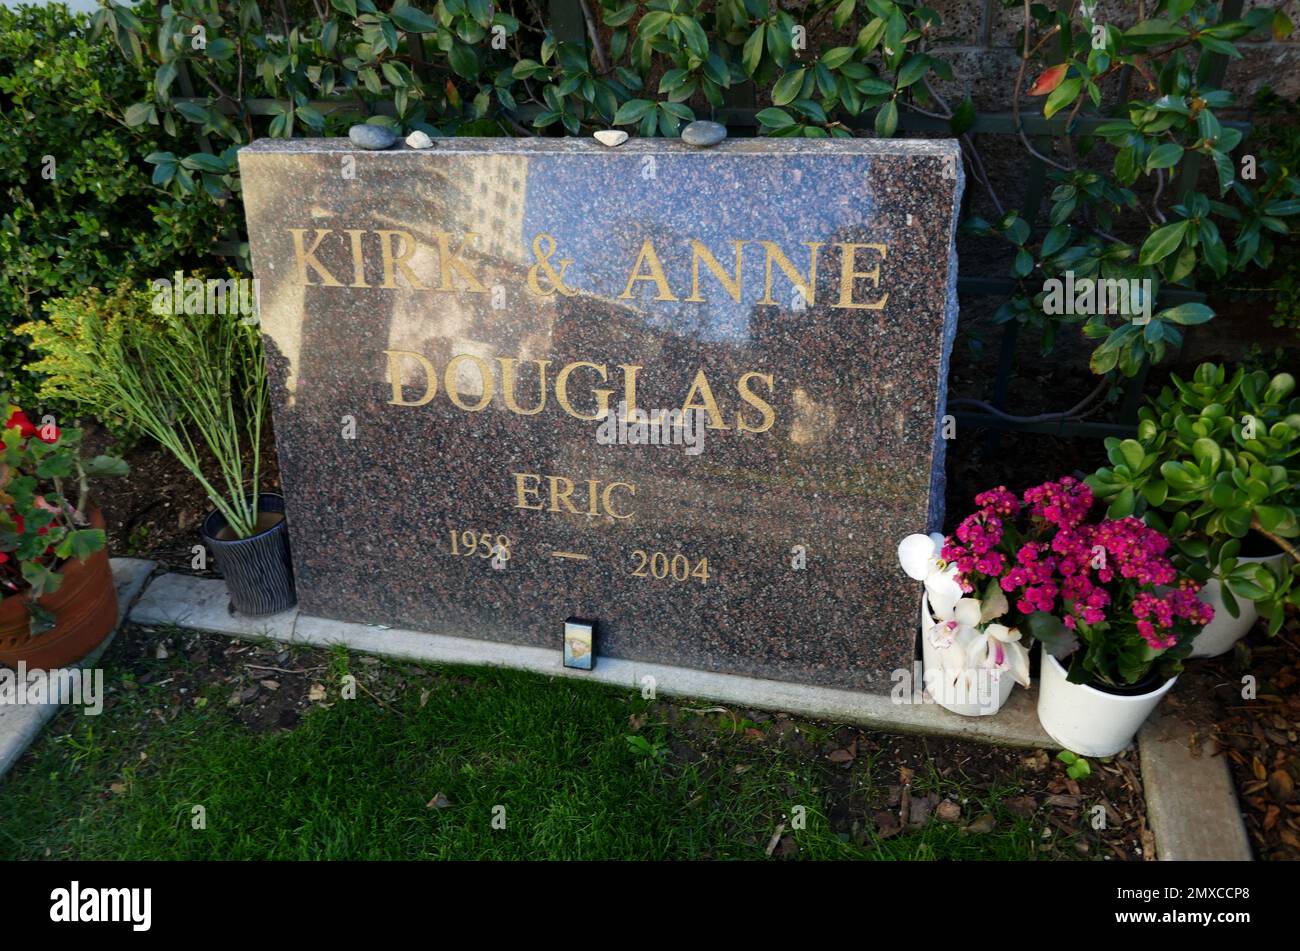 Los Angeles, California, USA 31st January 2023 A general view of atmosphere Actor Kirk Douglas, Anne Douglas and Eric Douglas's Graves at Pierce Brothers Westwood Village Memorial Park Cemetery on January 31, 2023 in Los Angeles, California, USA. Photo by Barry King/Alamy Stock Photo Stock Photo